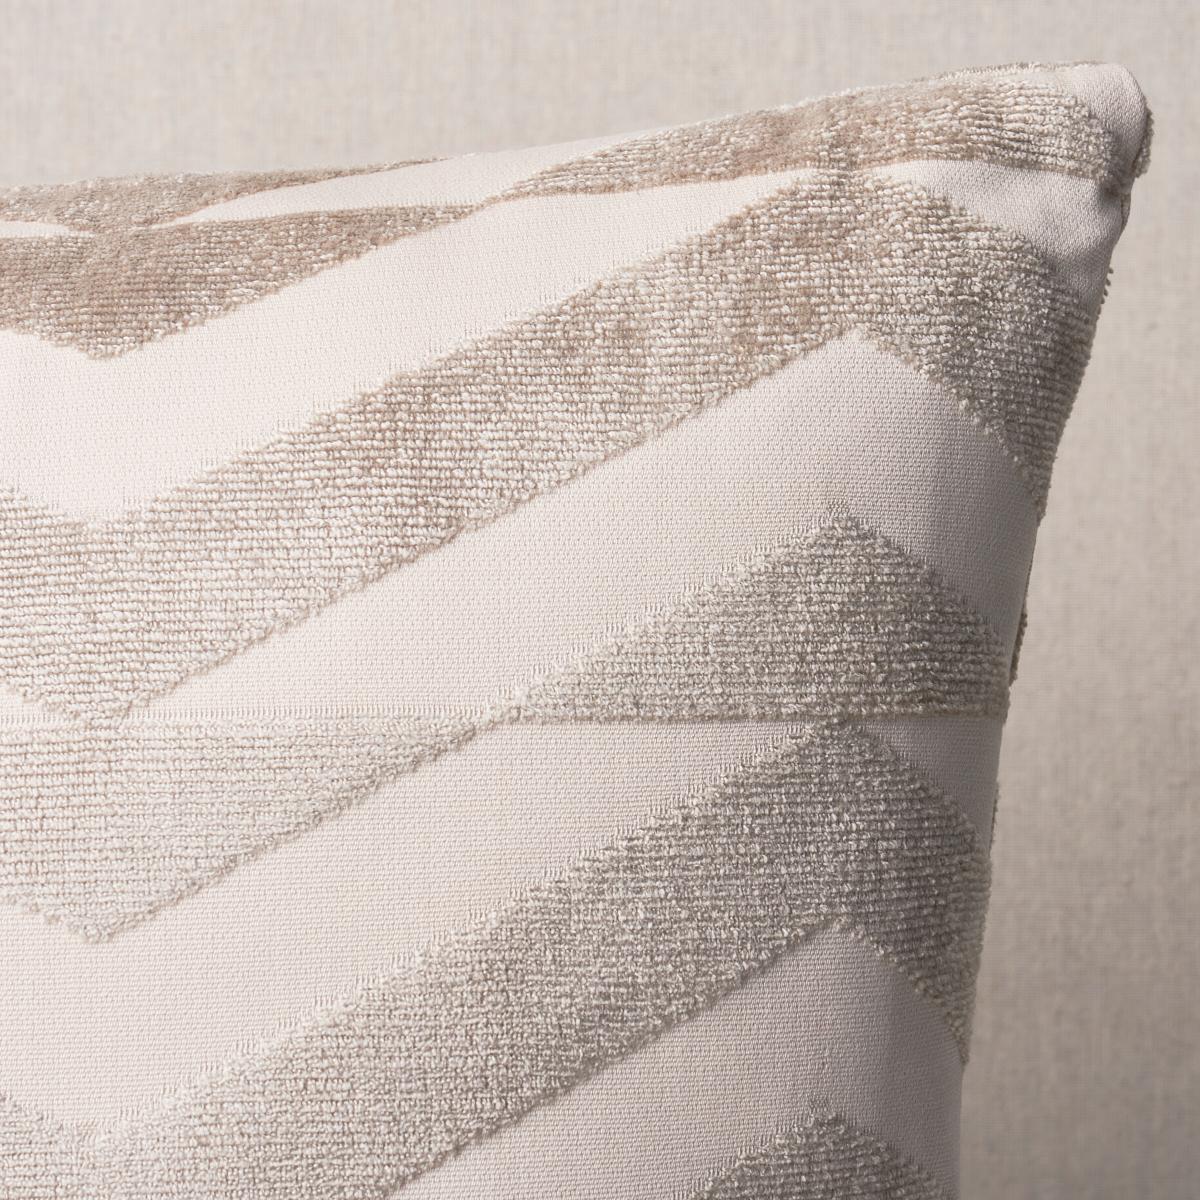 This pillow features Broken Chevron Cut Velvet by Miles Redd for Schumacher with a knife edge finish. Miles Redd was so charmed by a painted staircase photographed from above that he recreated it as taupe-on-ivory-colored Broken Chevron Velvet, a